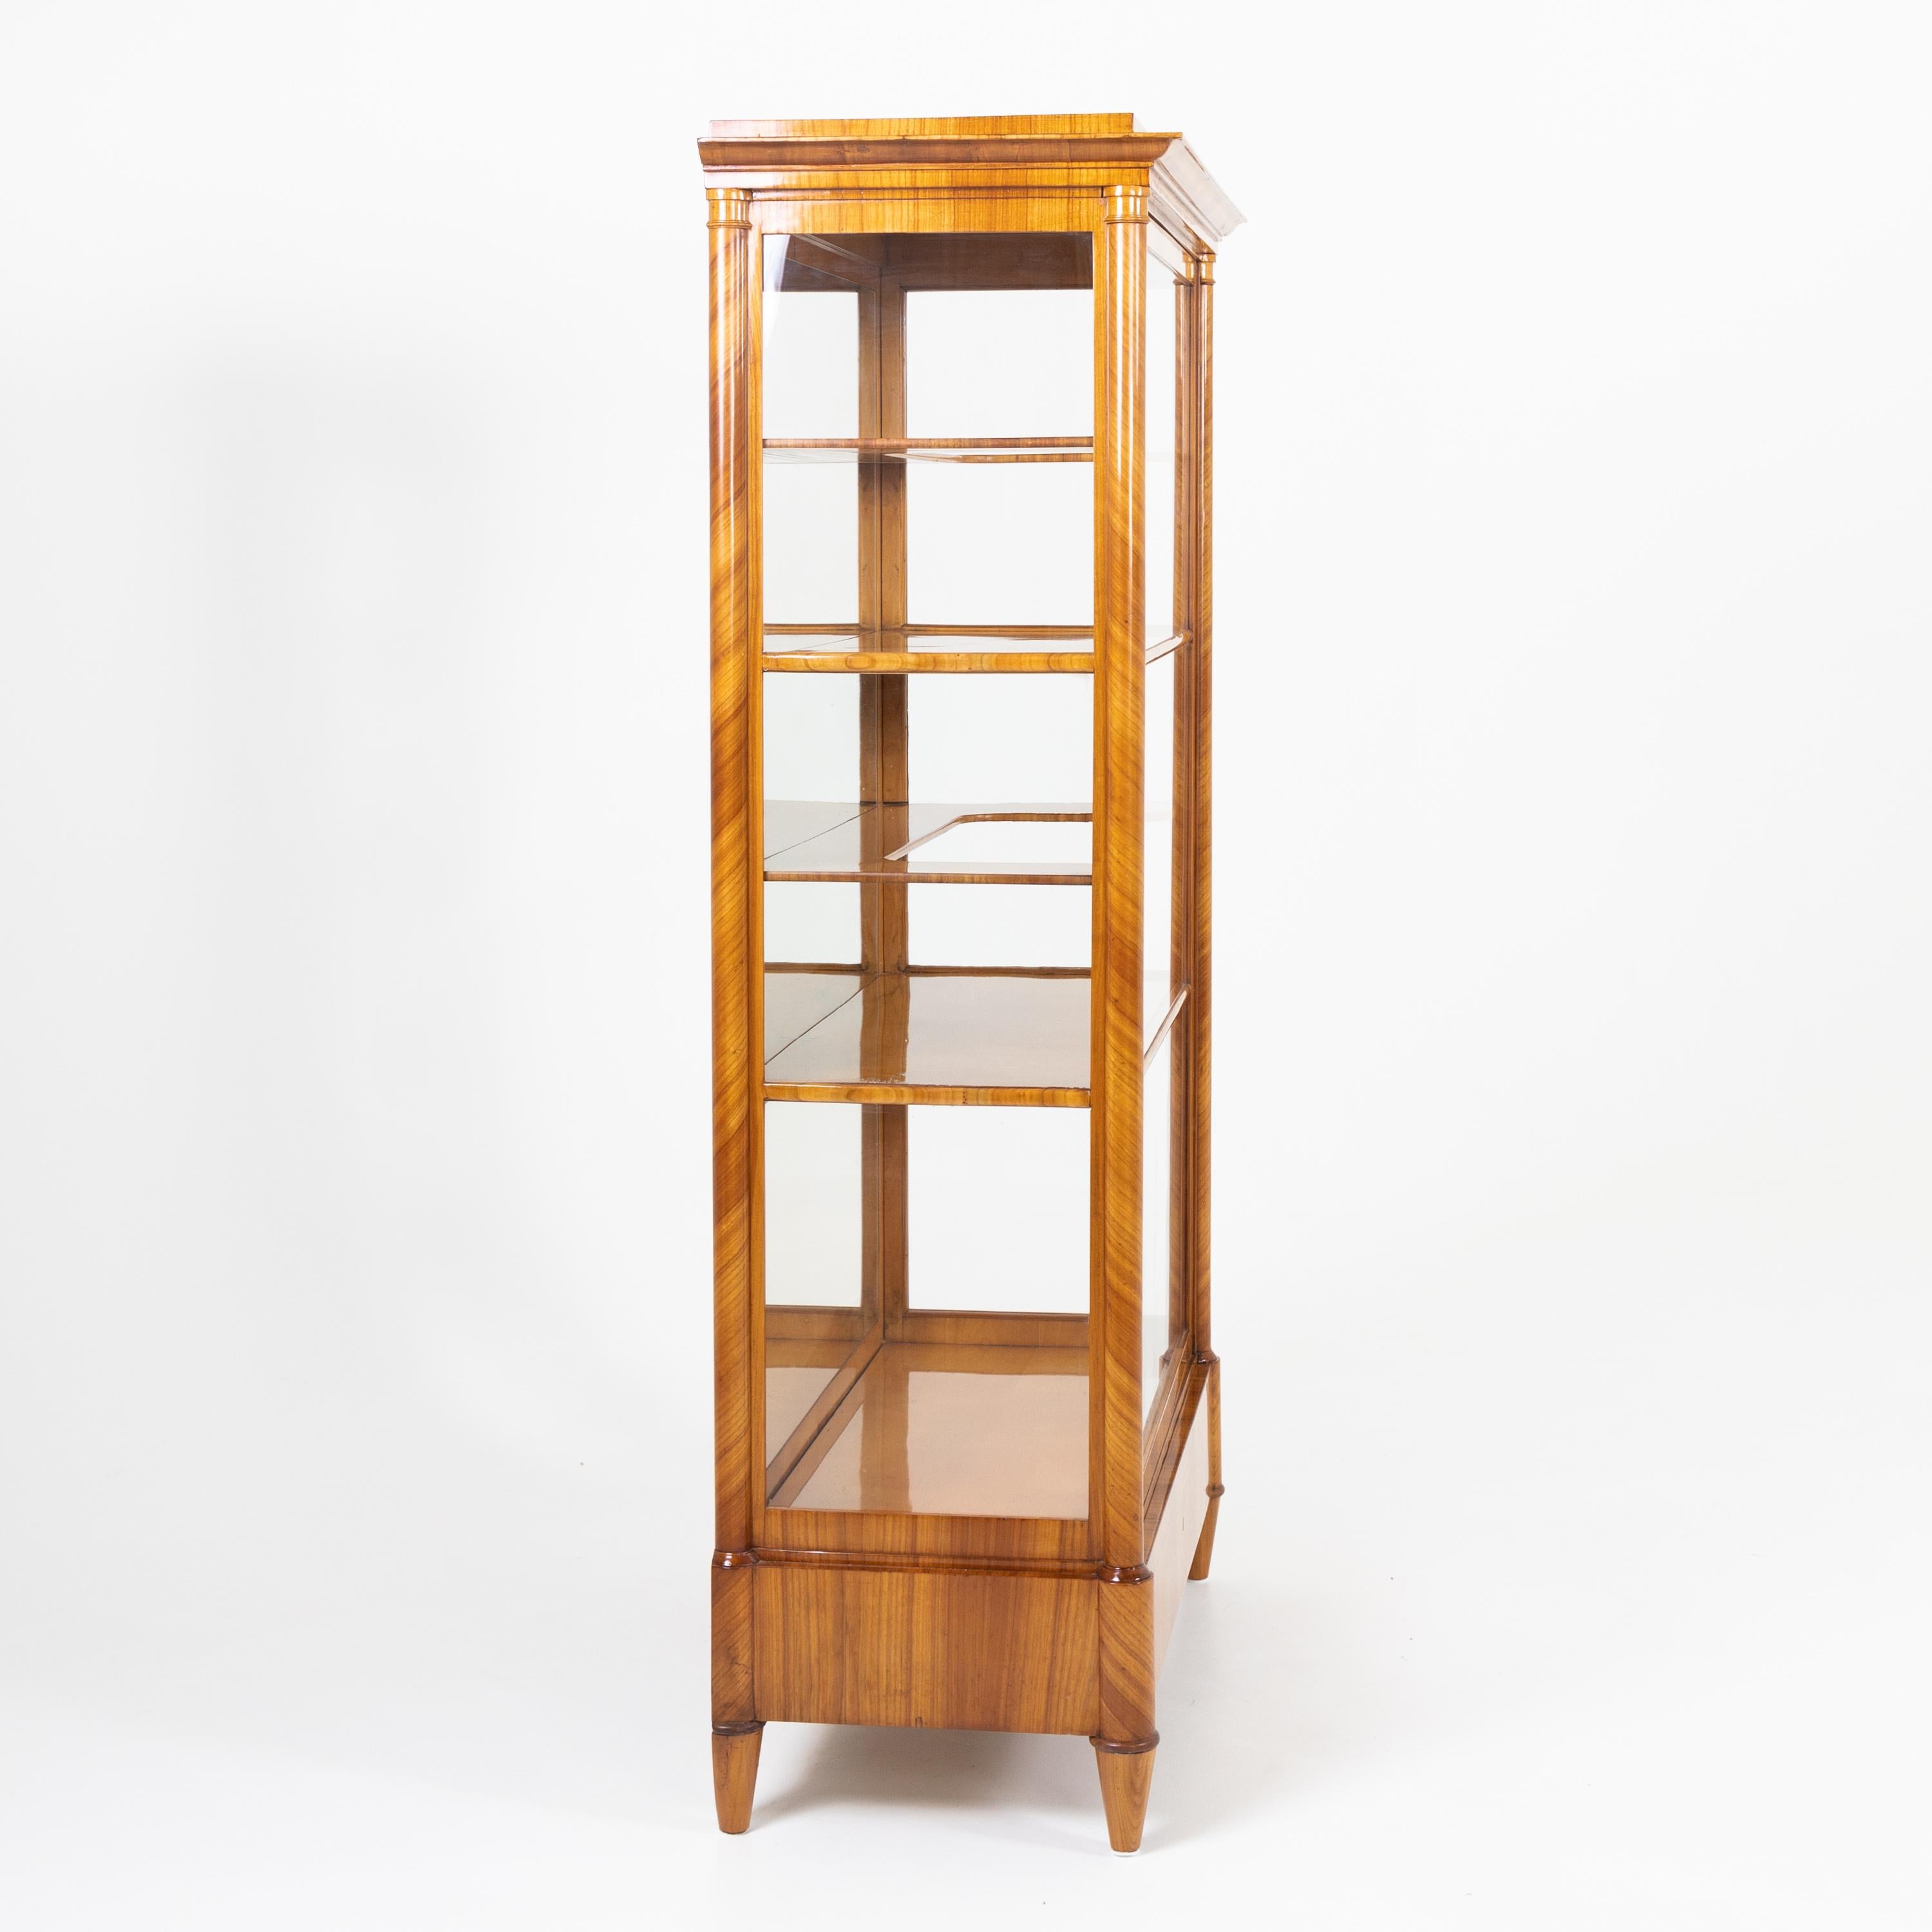 Mid-19th Century Biedermeier Display Case, Southern Germany, c. 1830 For Sale